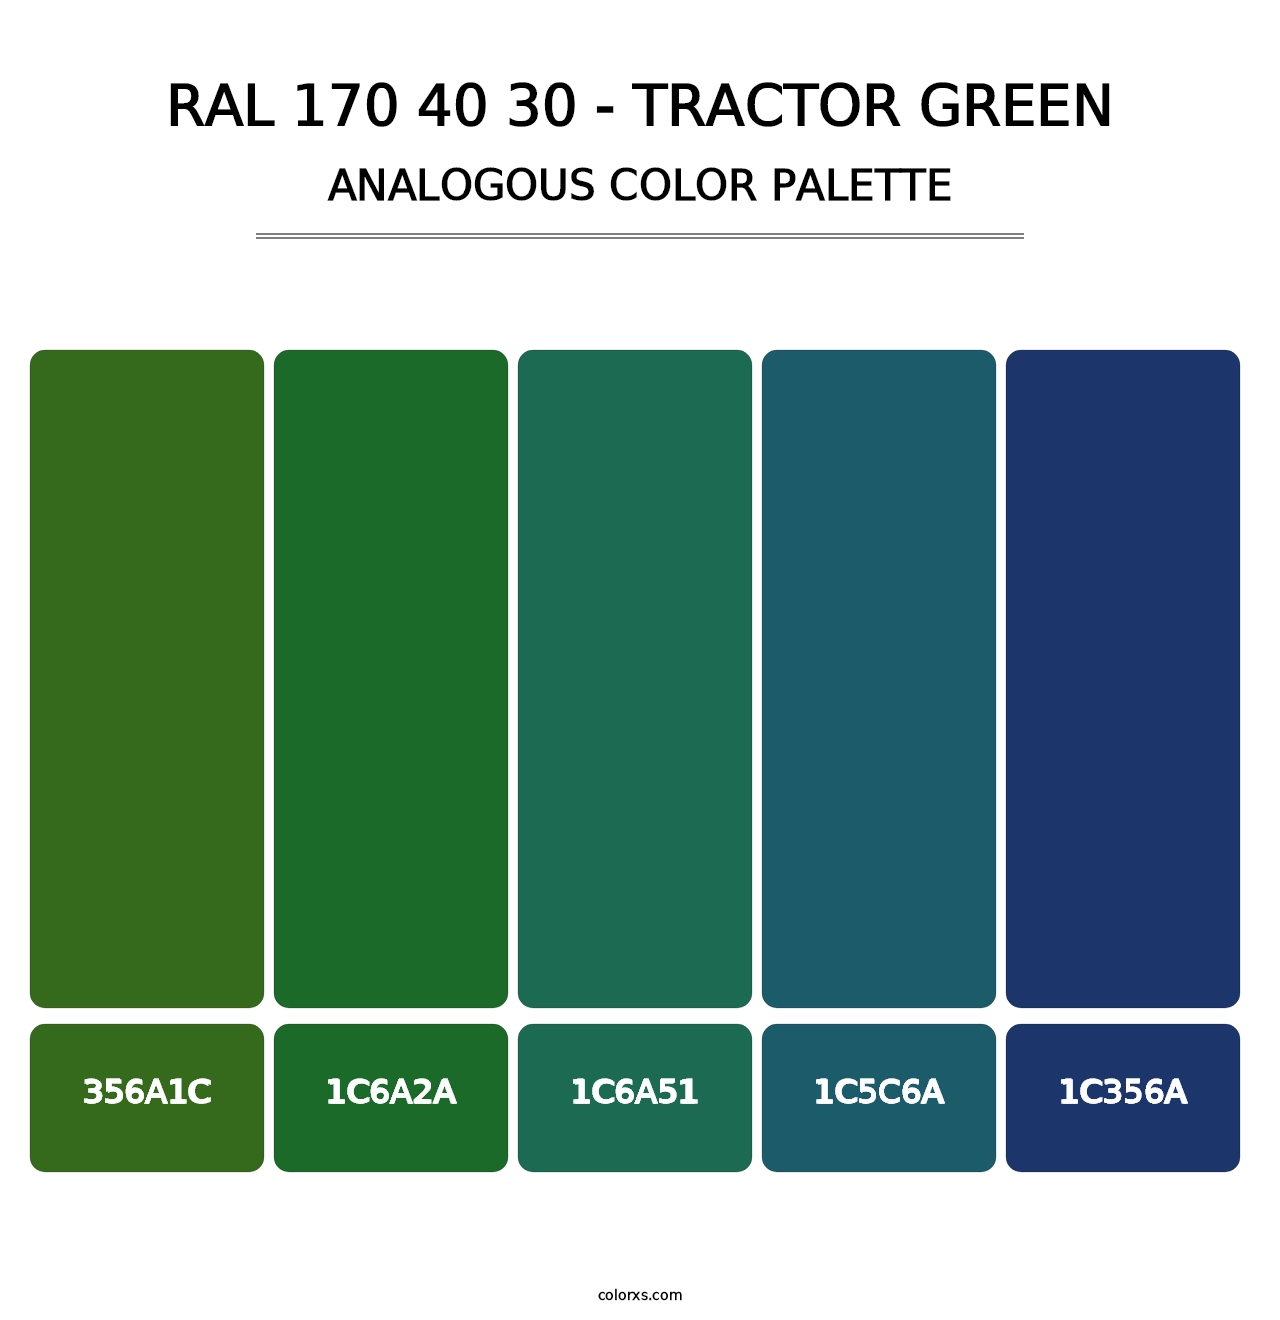 RAL 170 40 30 - Tractor Green - Analogous Color Palette